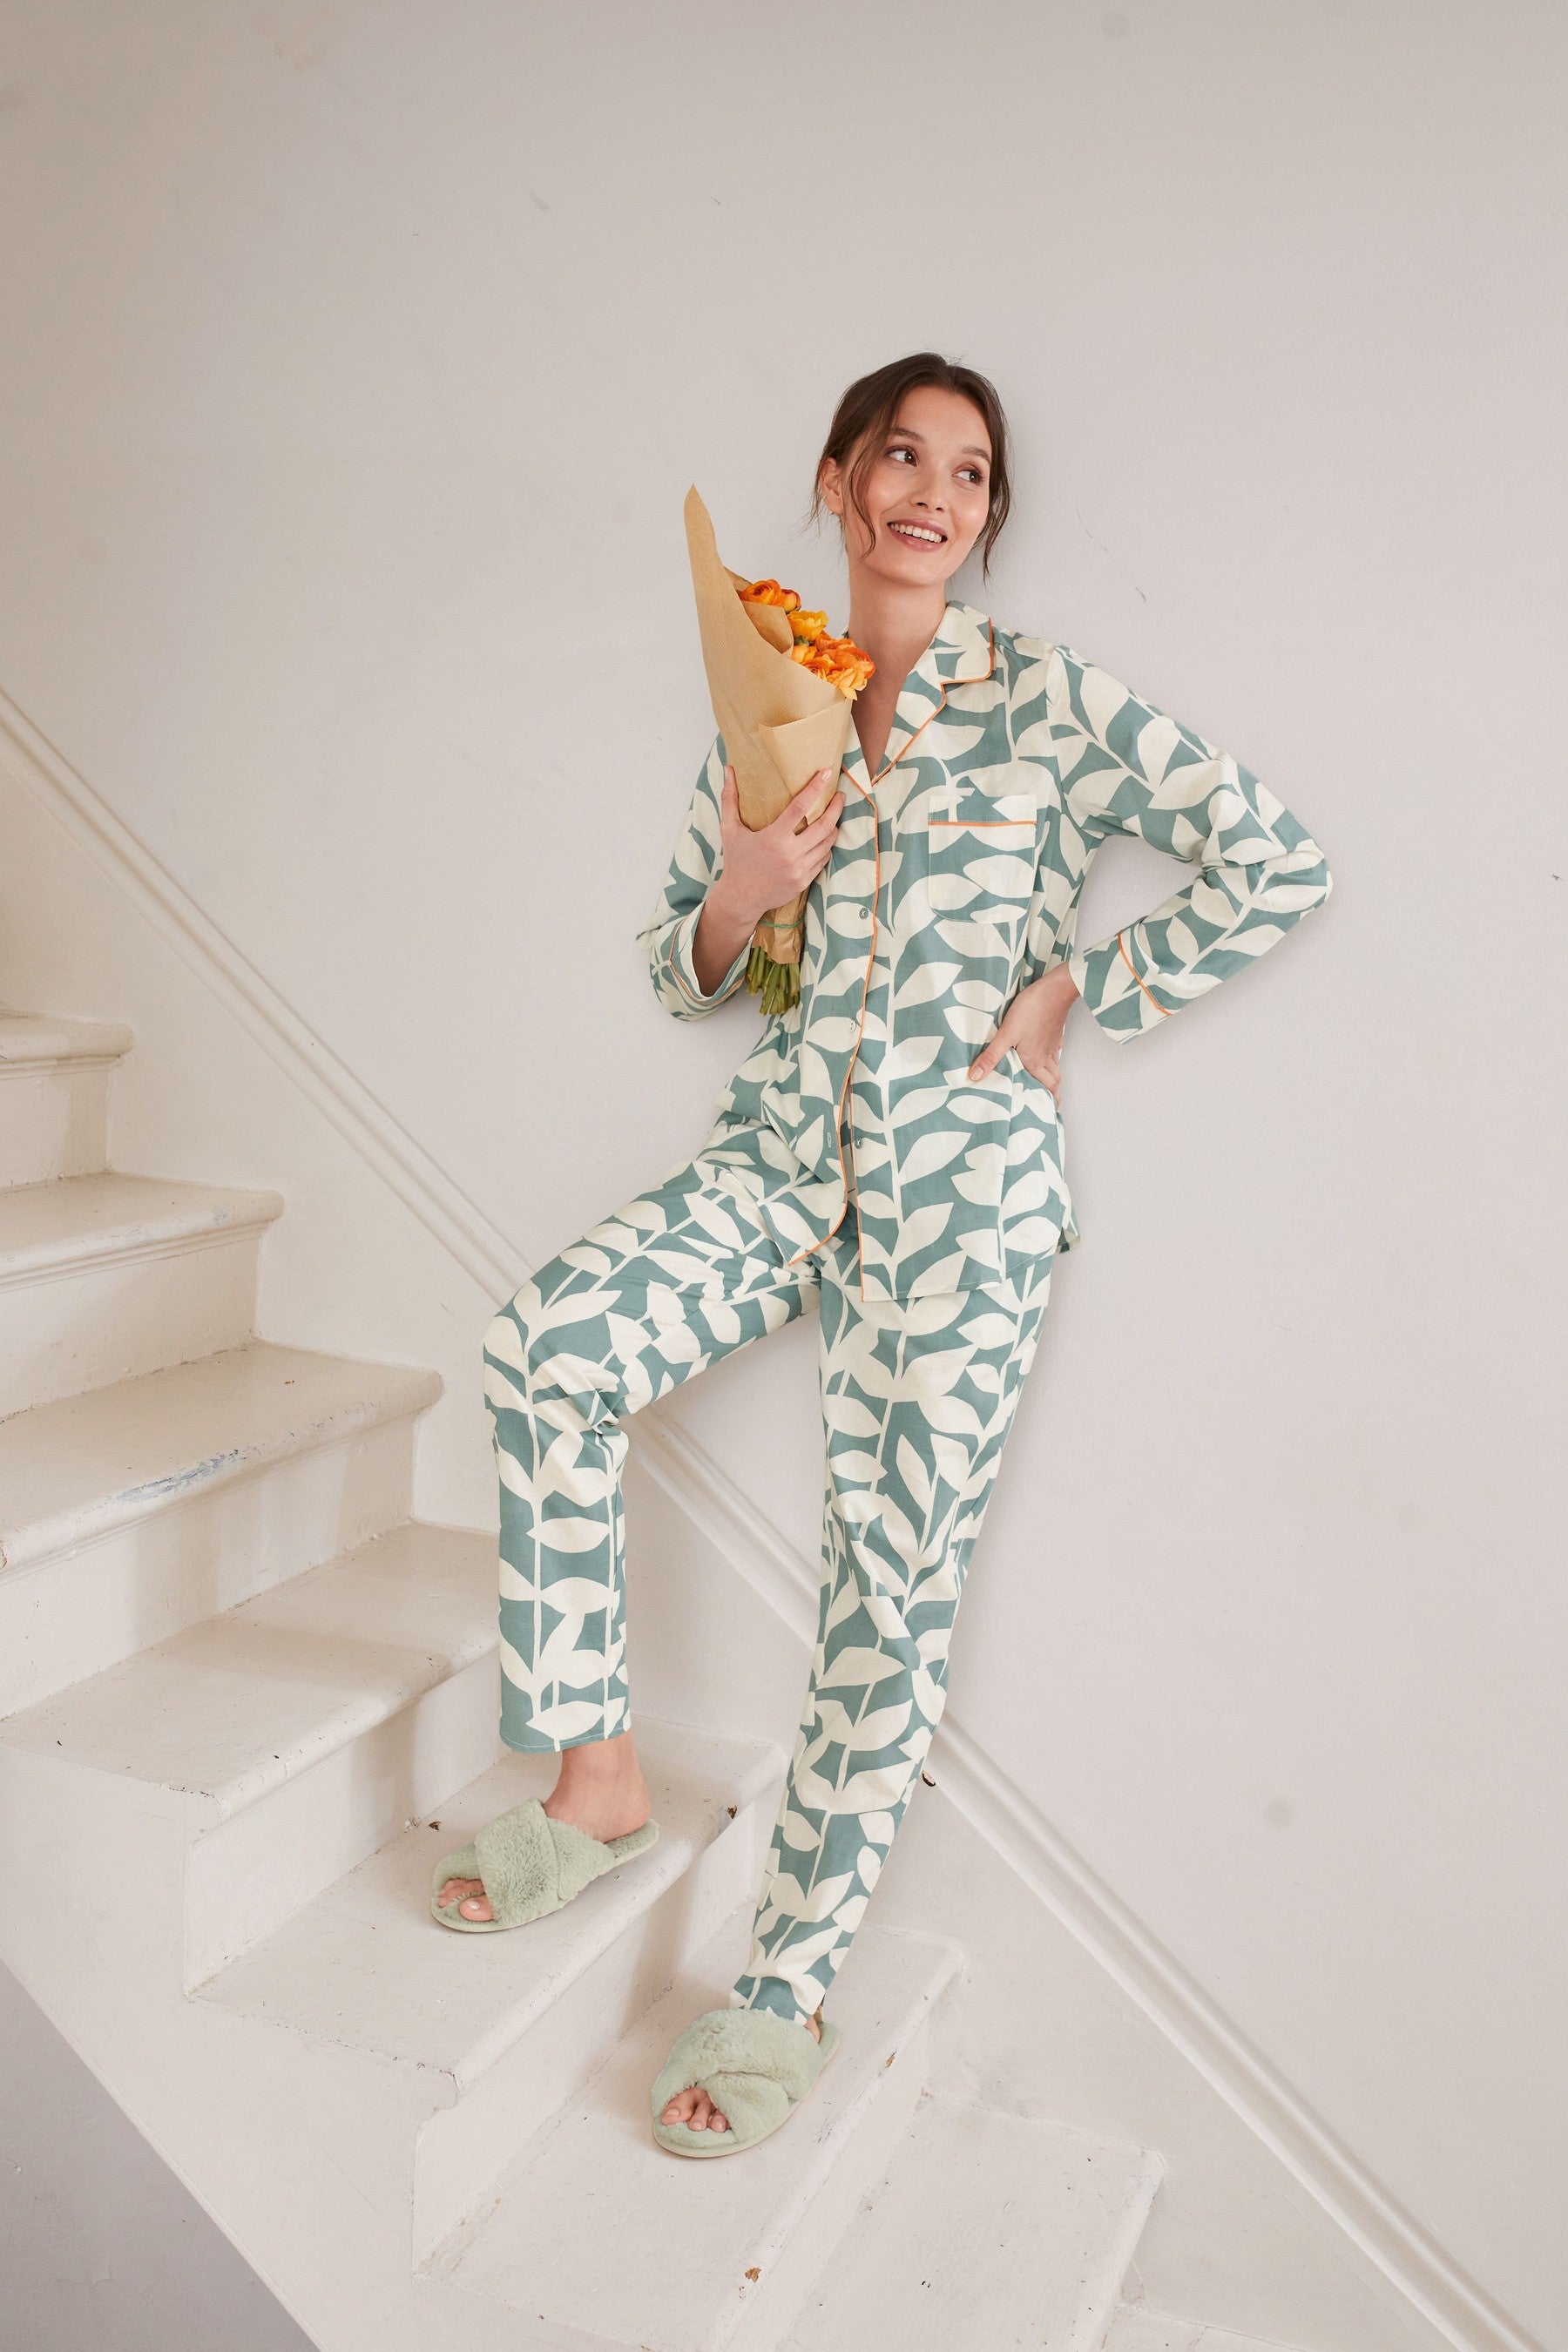 Gray Color Digital Abstract Printed loungewear/Nightsuit For Women With Pants.